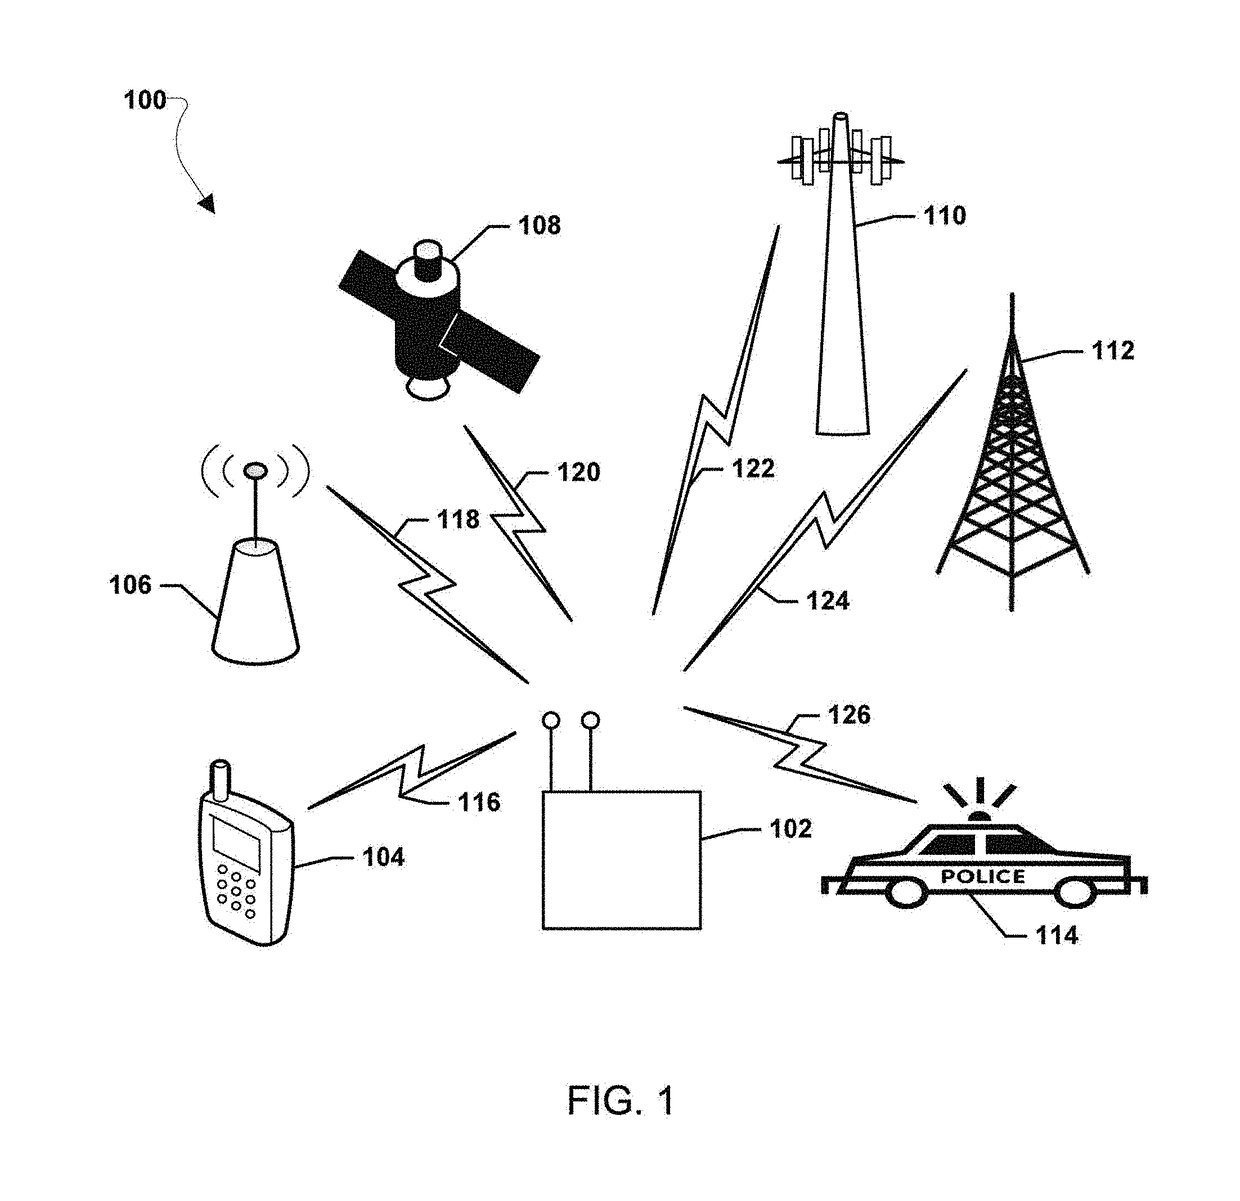 Systems, methods, and devices for geolocation with deployable large scale arrays